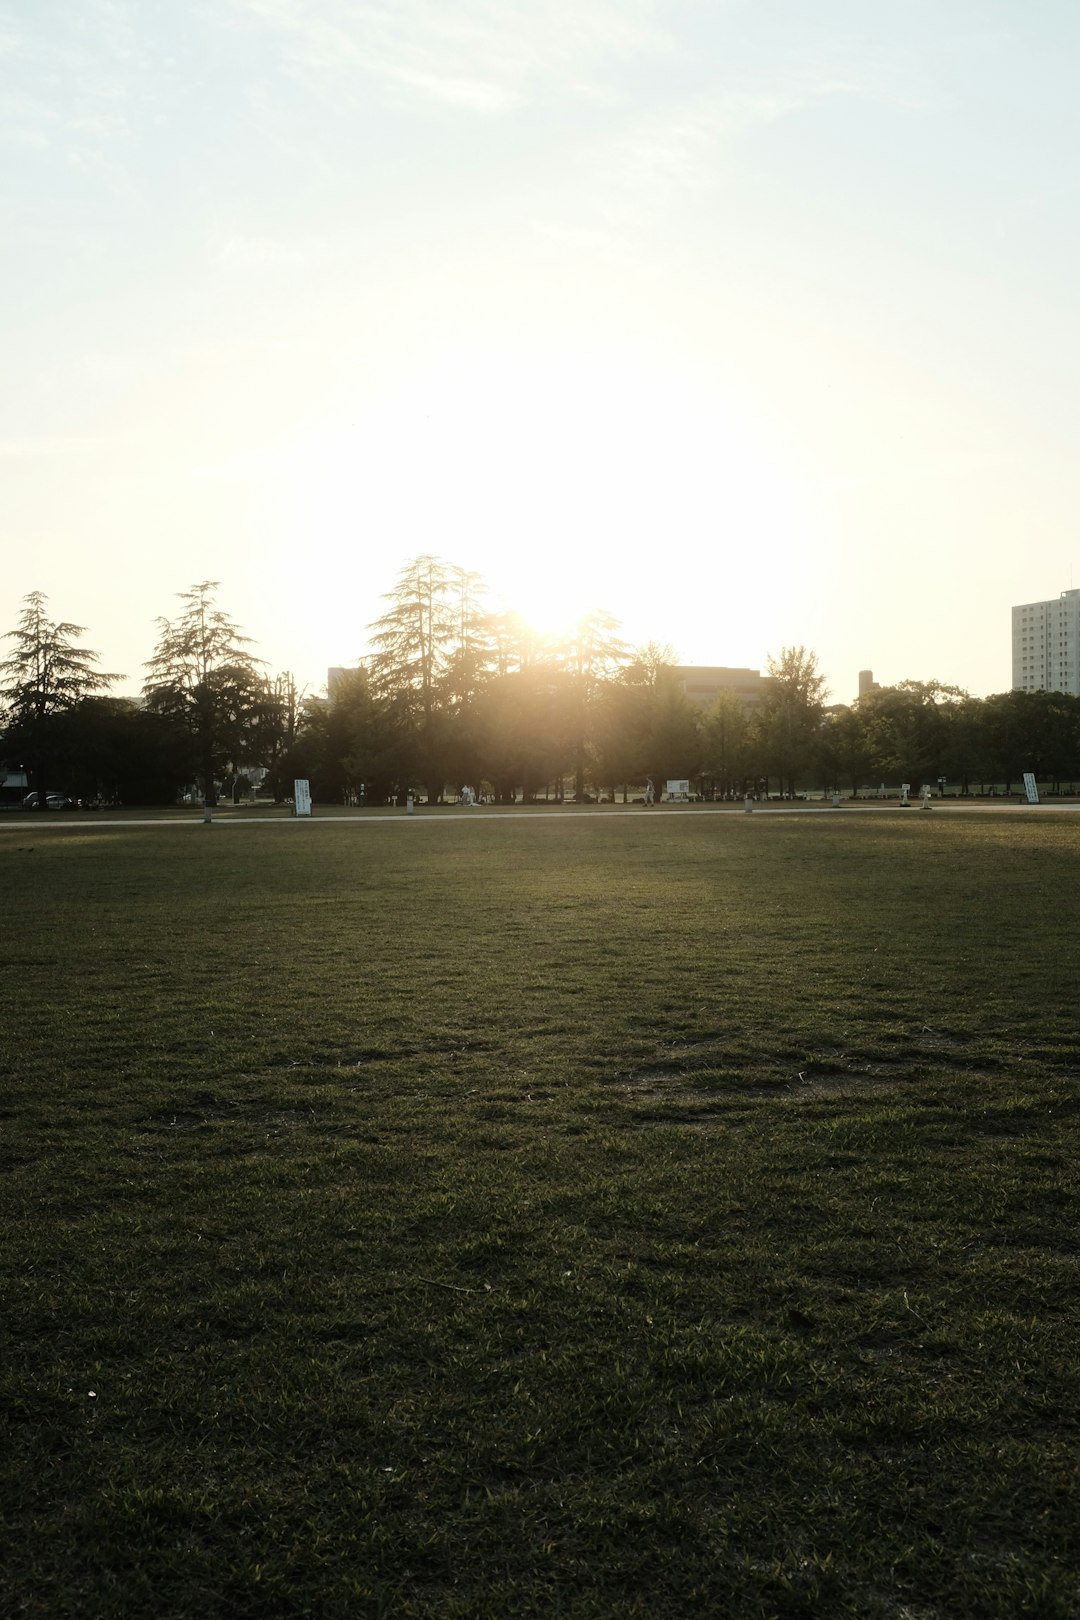 green grass field with trees and buildings in the distance